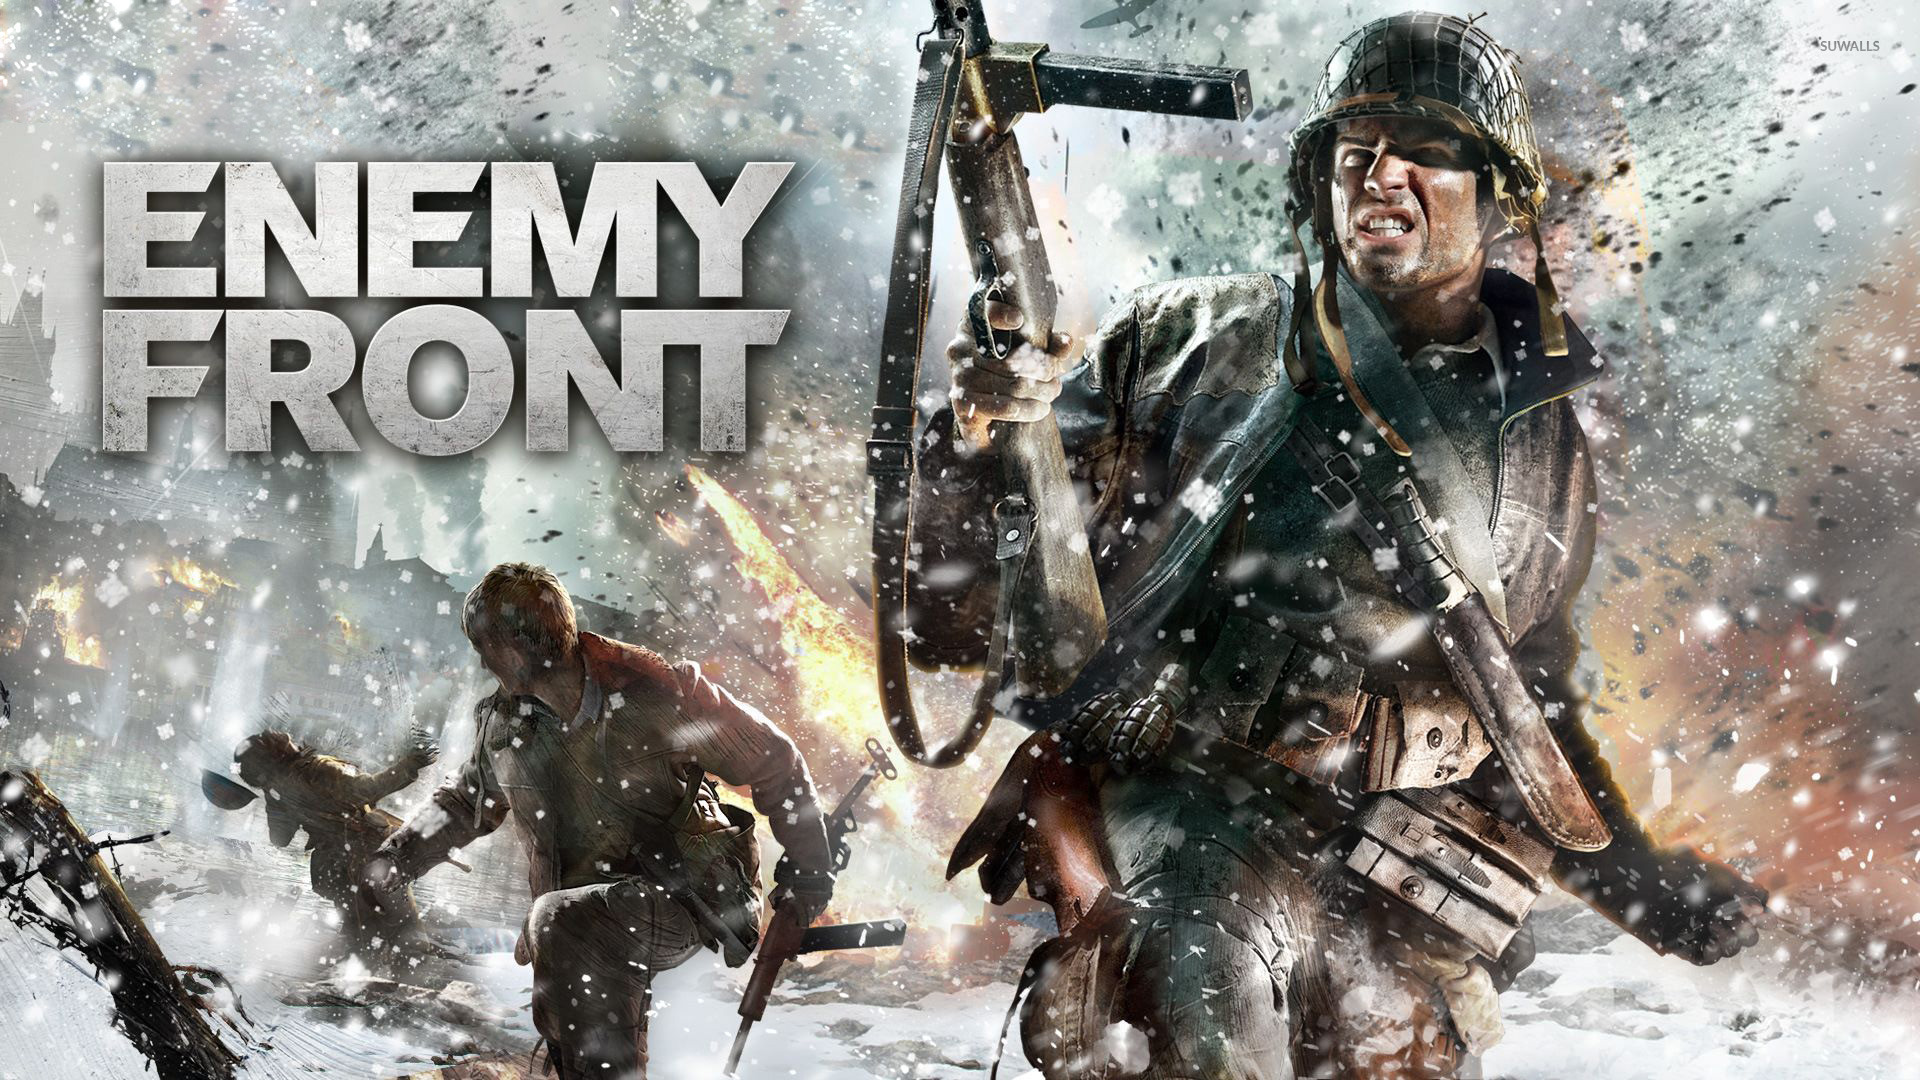 Enemy front patch download